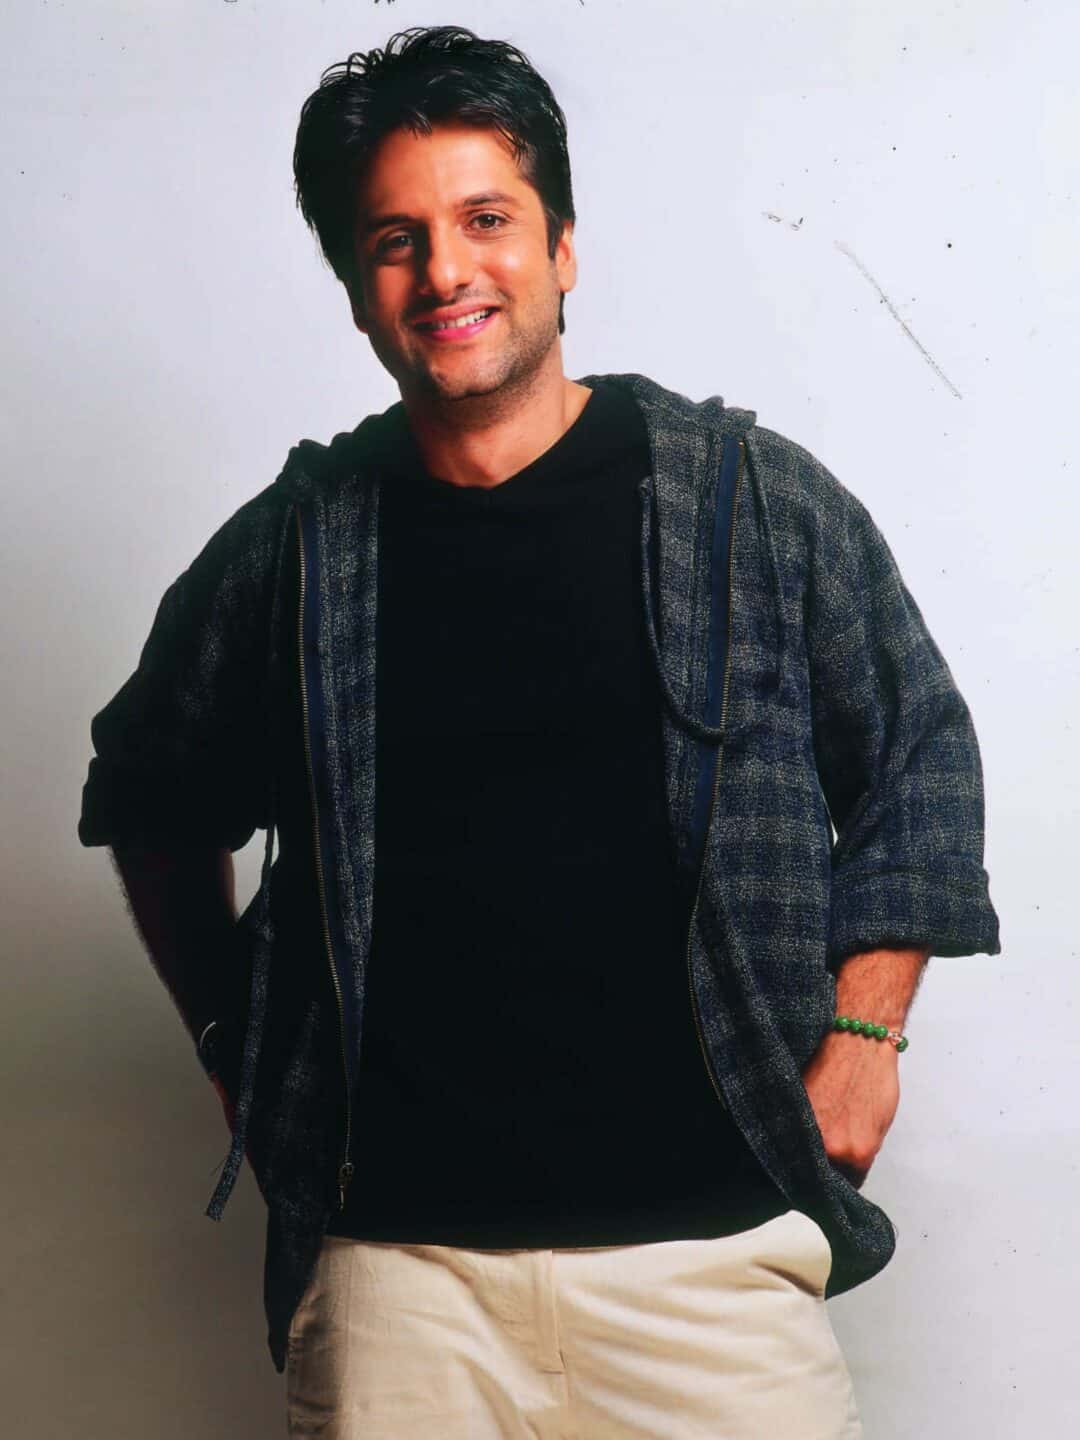 Fardeen Khan - Early Life And Upbringing